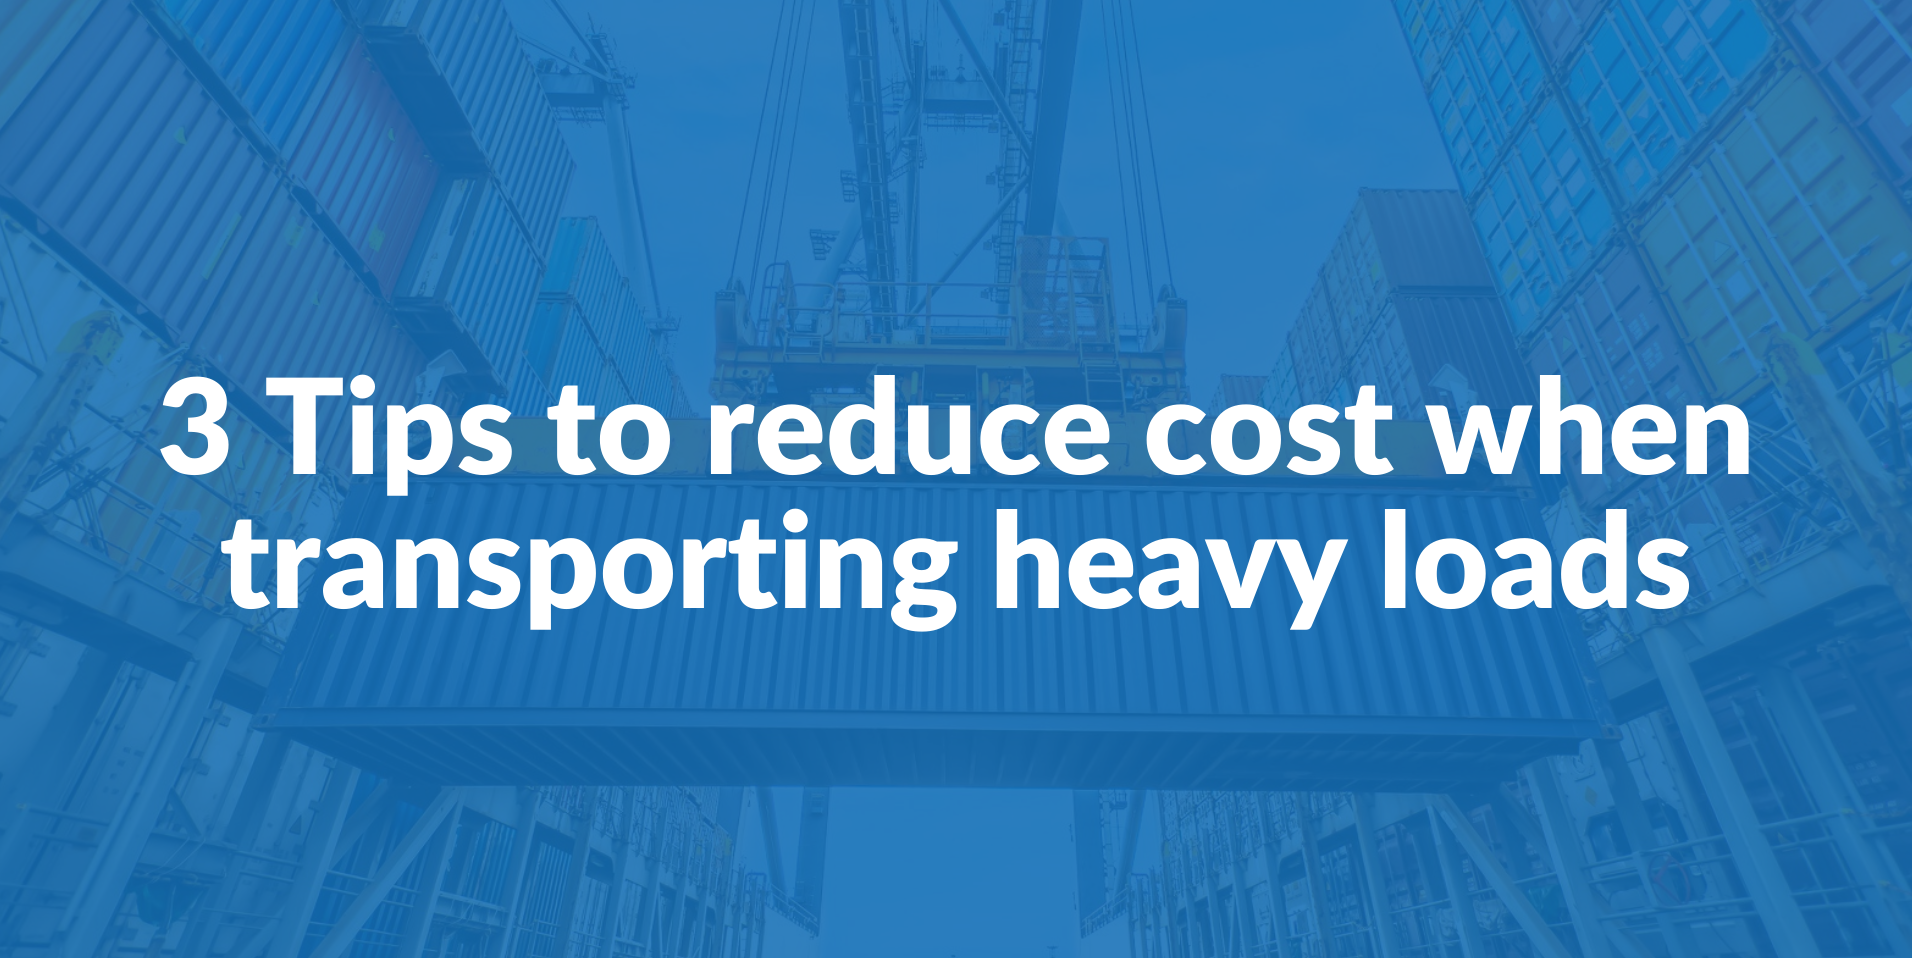 3 Critical Tips to reduce cost when transporting heavy loads